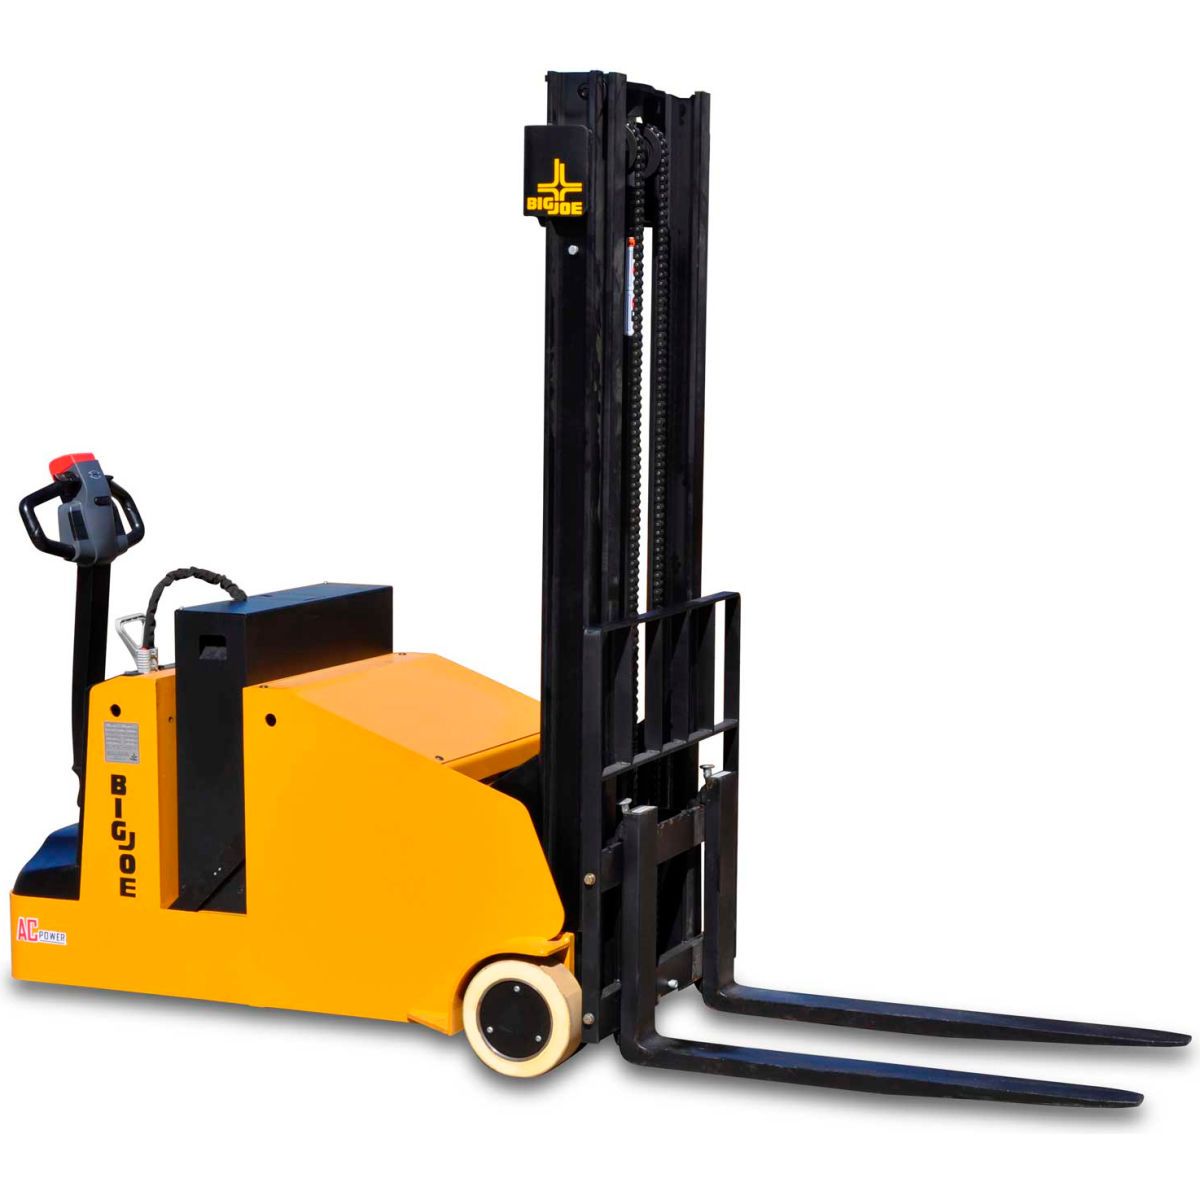 Picture of Big Joe Lift B2381587 2200 lbs CB22 Fully Powered Counterbalanced Lift Truck with 157 in. Lift